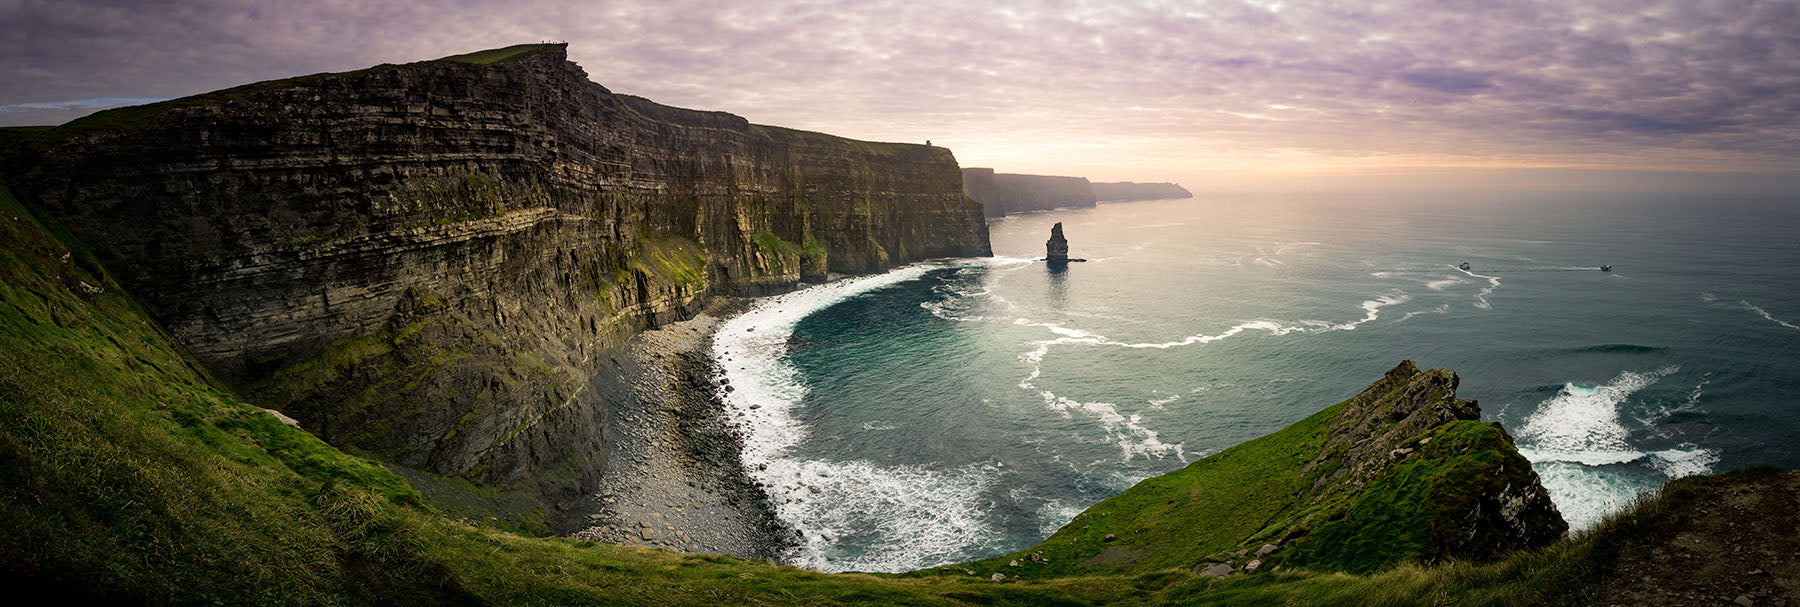 The Cliffs of Moher - stunning panoramic photo